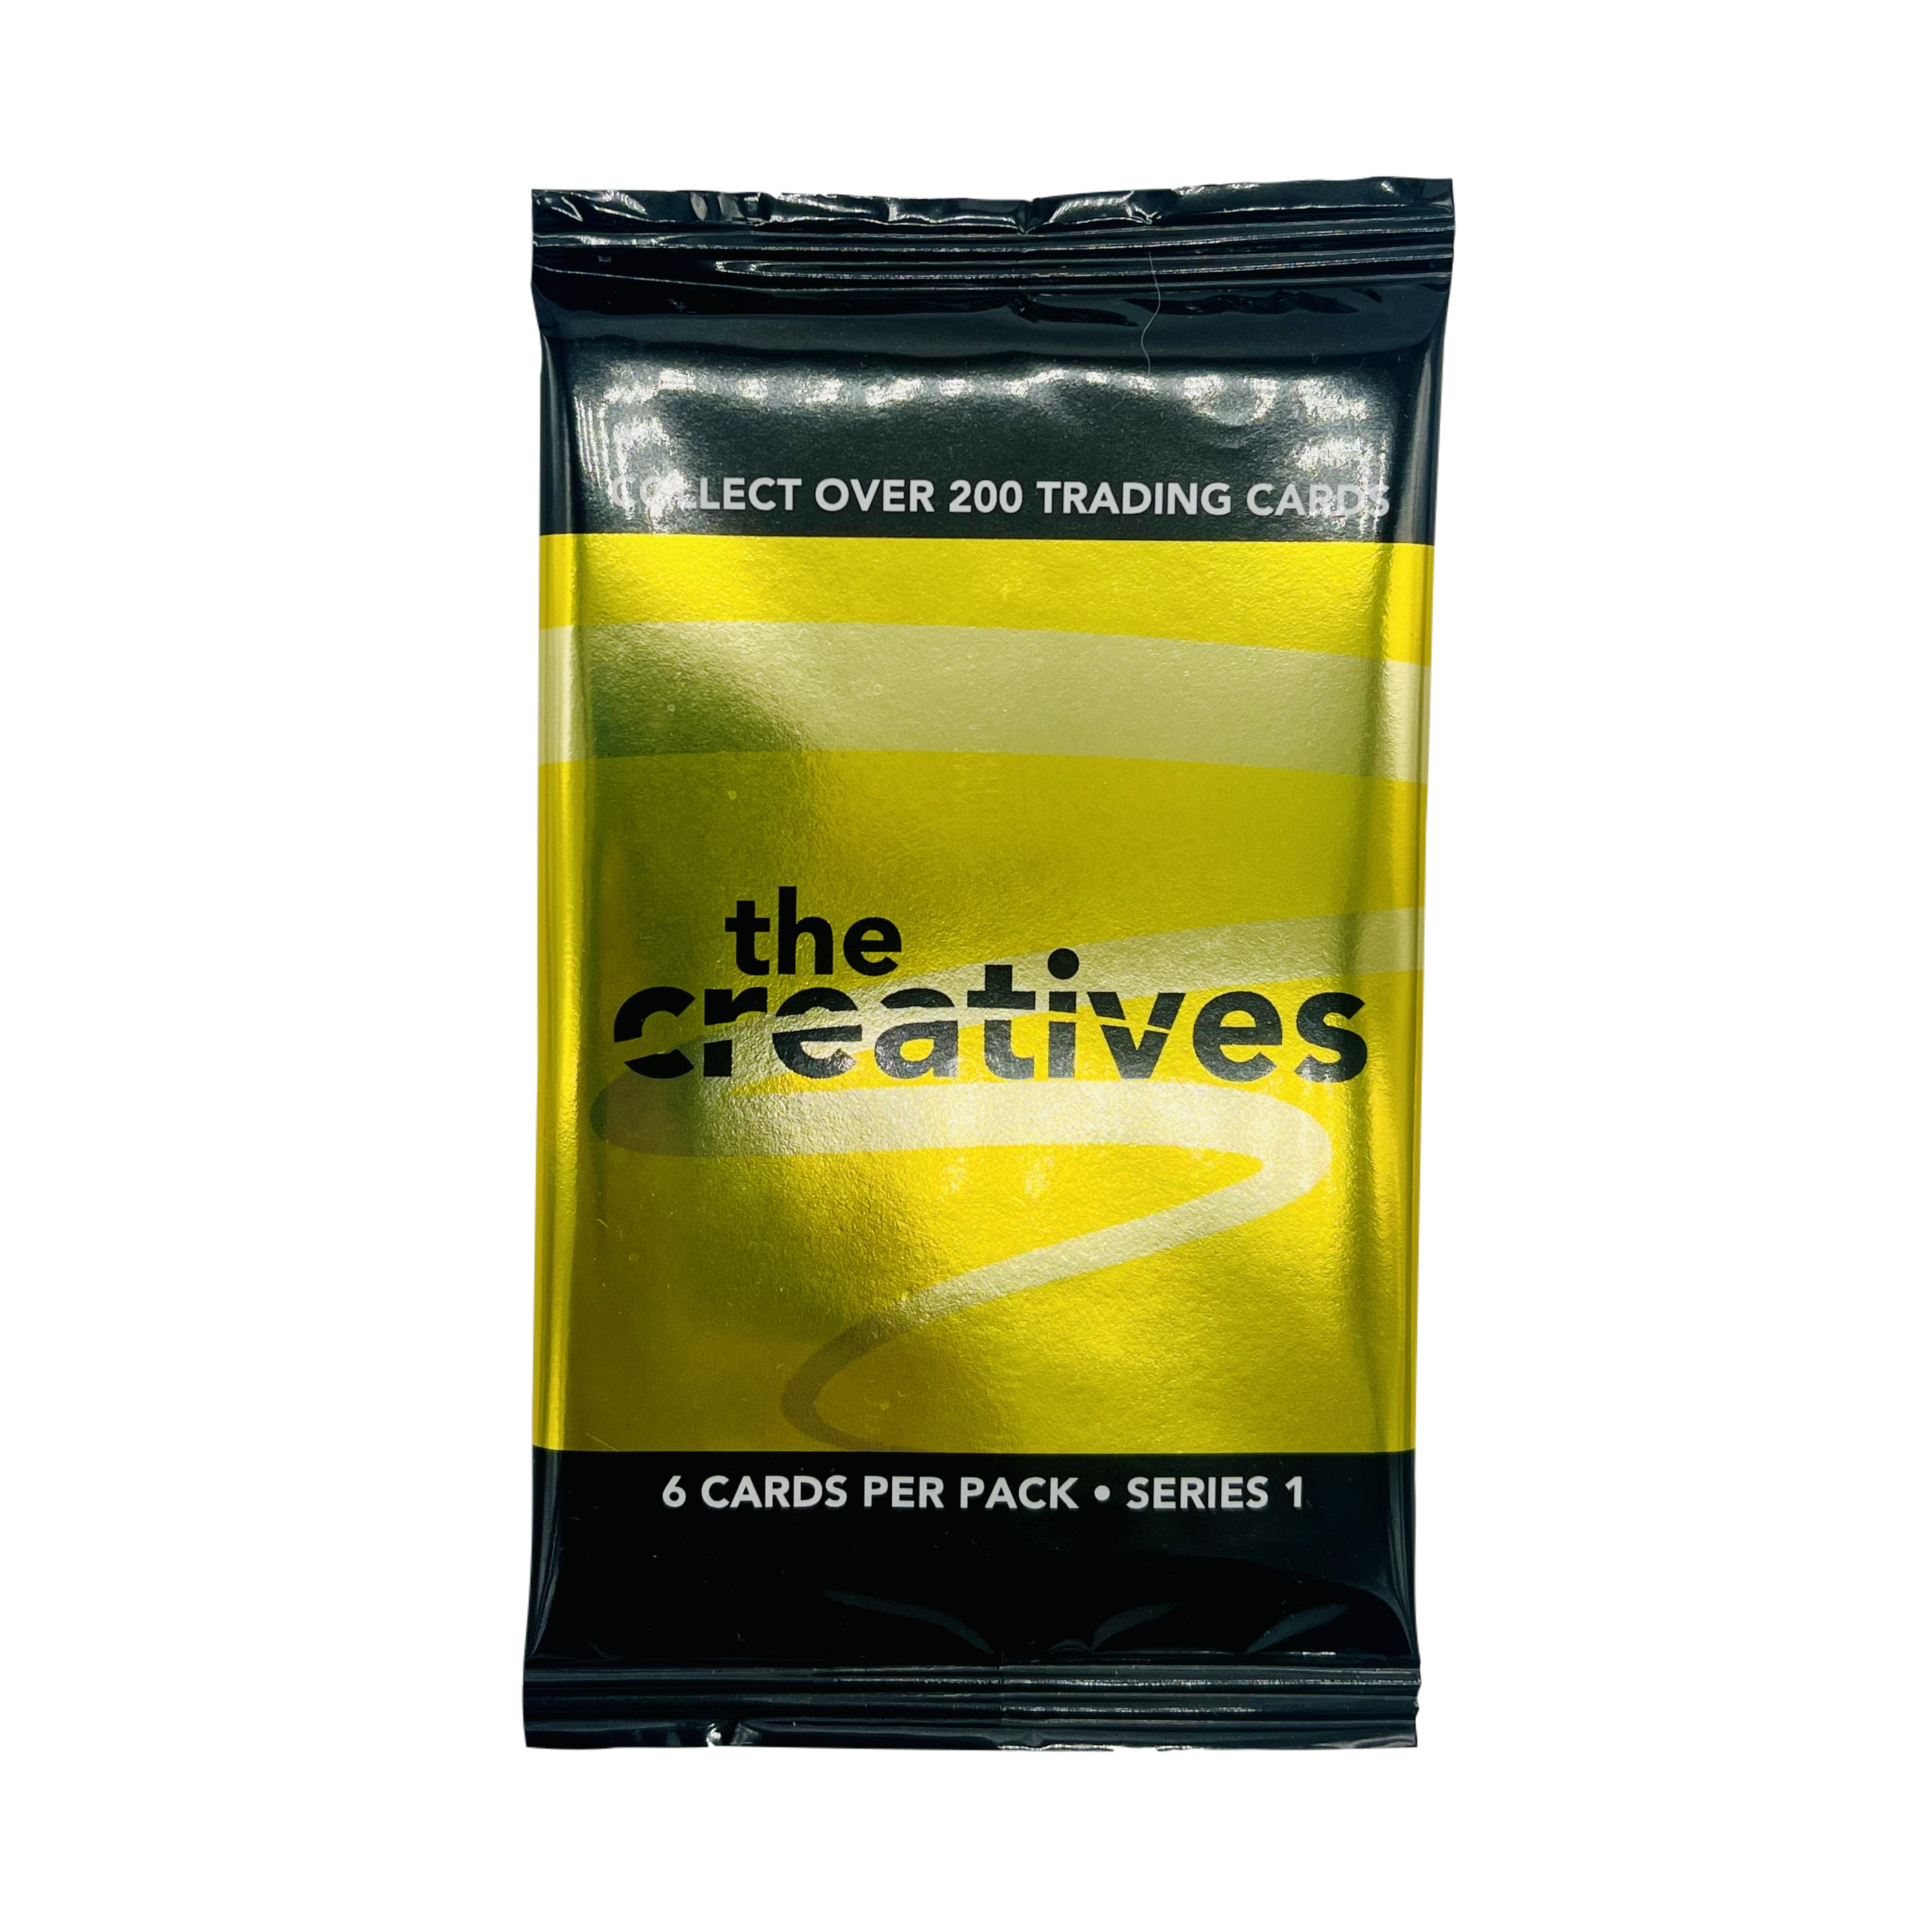 The Creatives : Trading Card Project